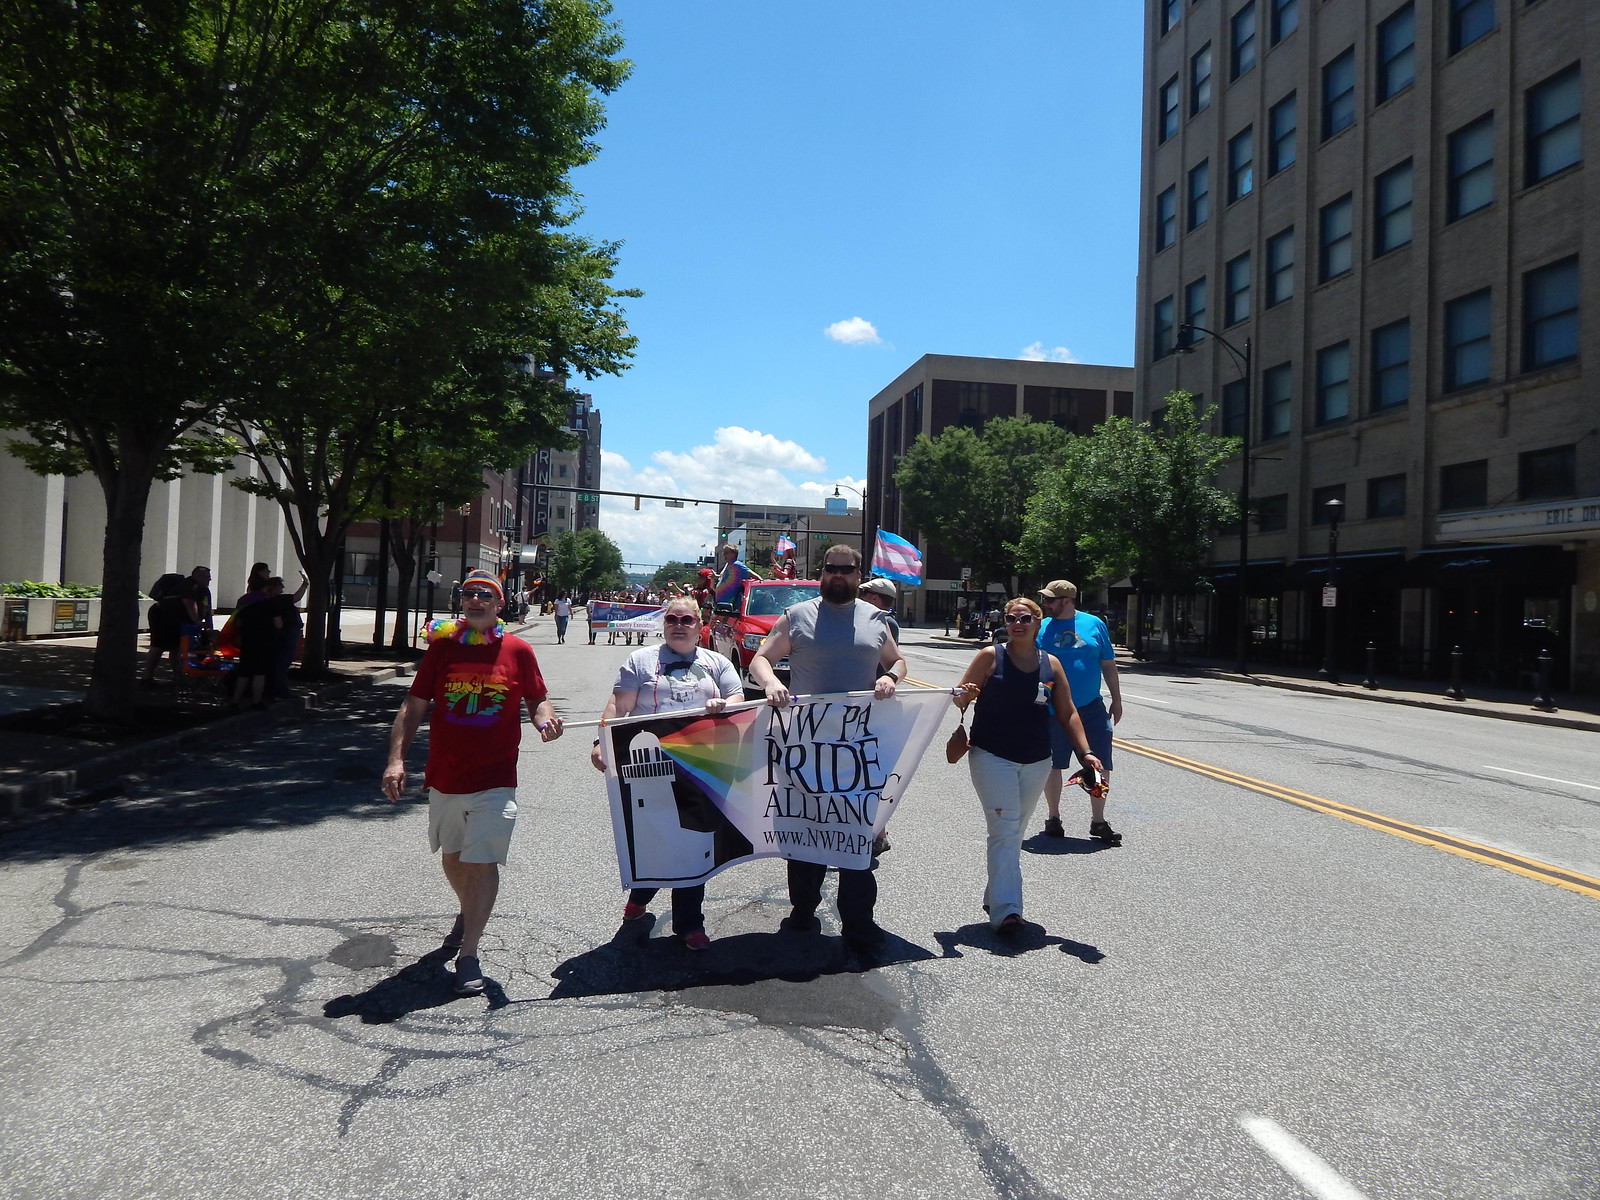 NW PA Pride Alliance leading Pride parade